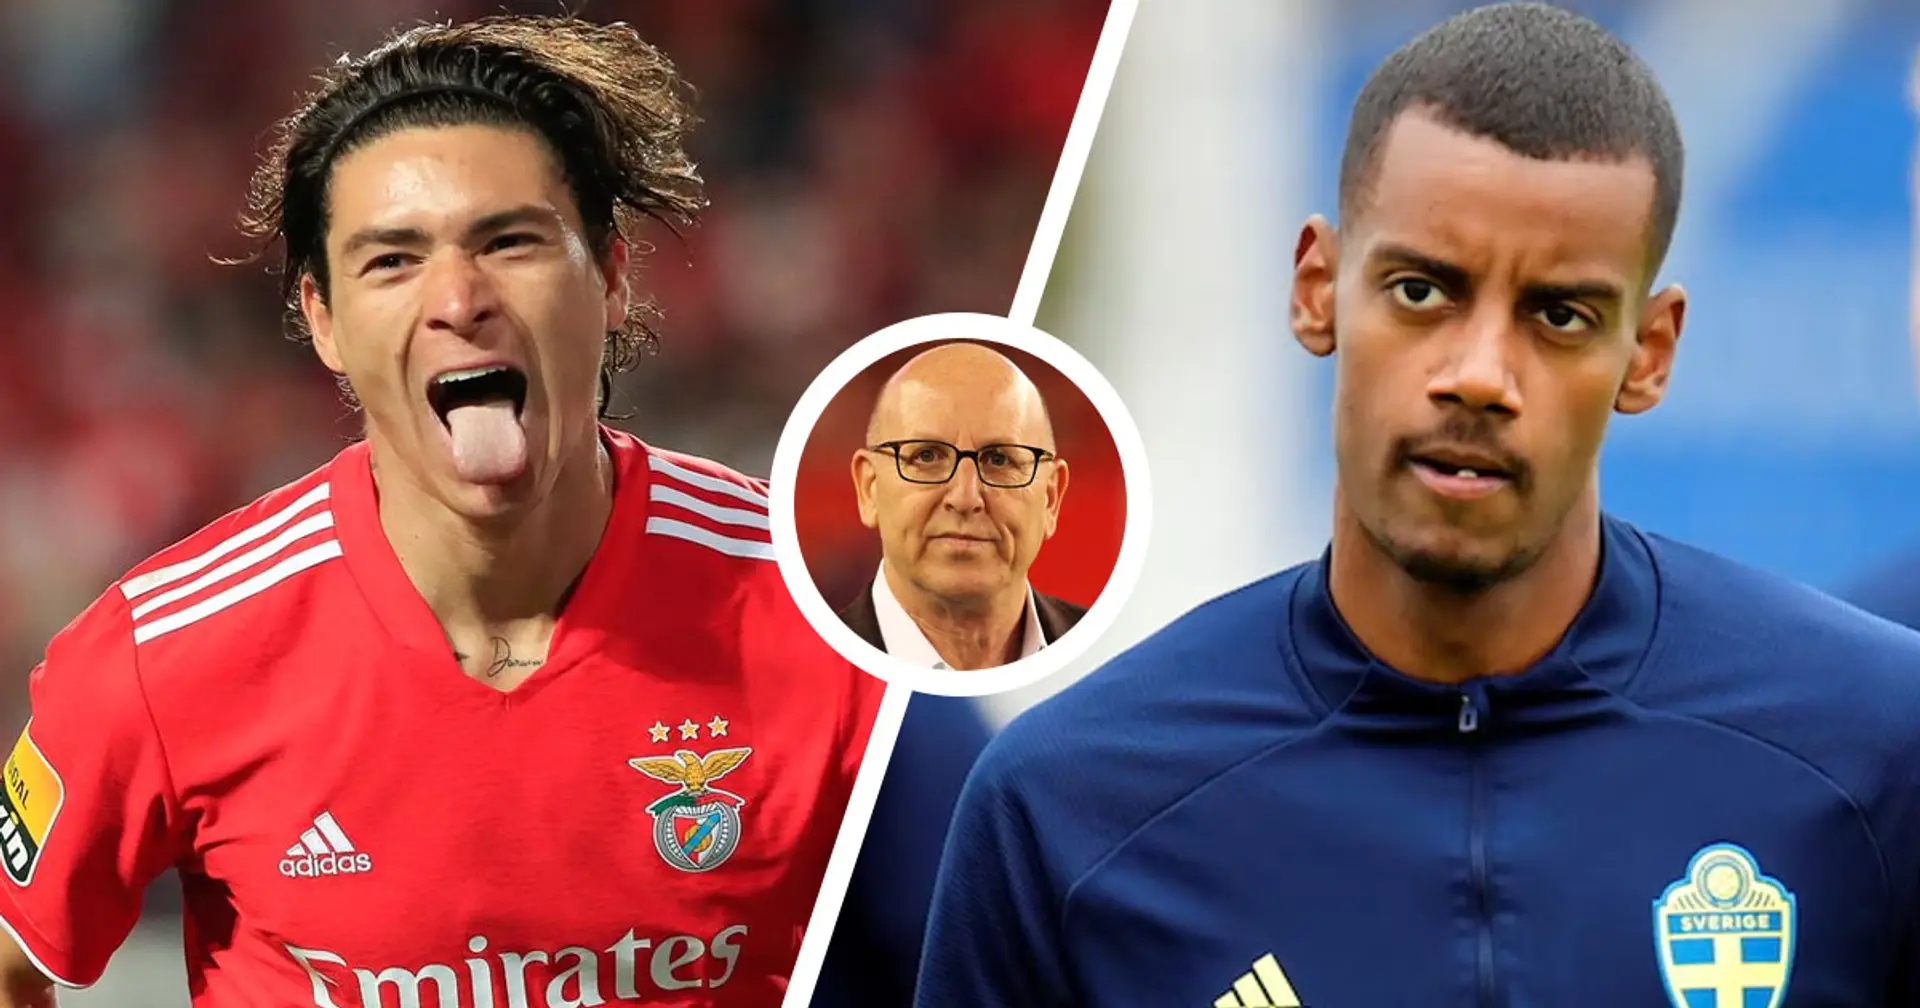 Alexander Isak & more: Man United fans name who they’d want as new striker signing in the summer